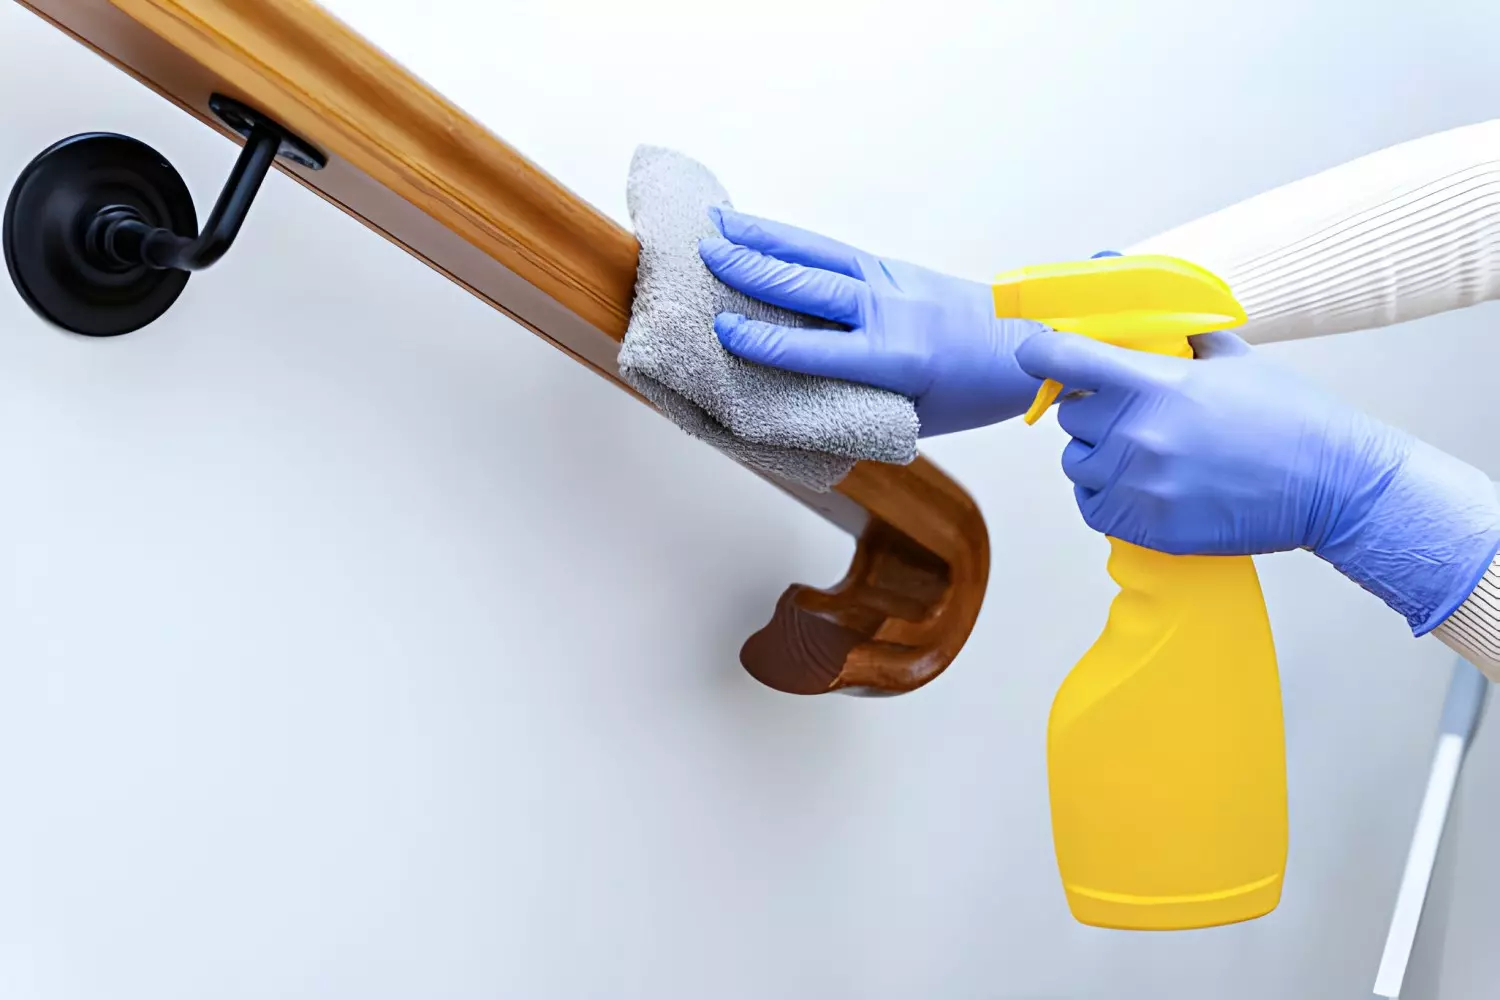 How to clean wooden handrails